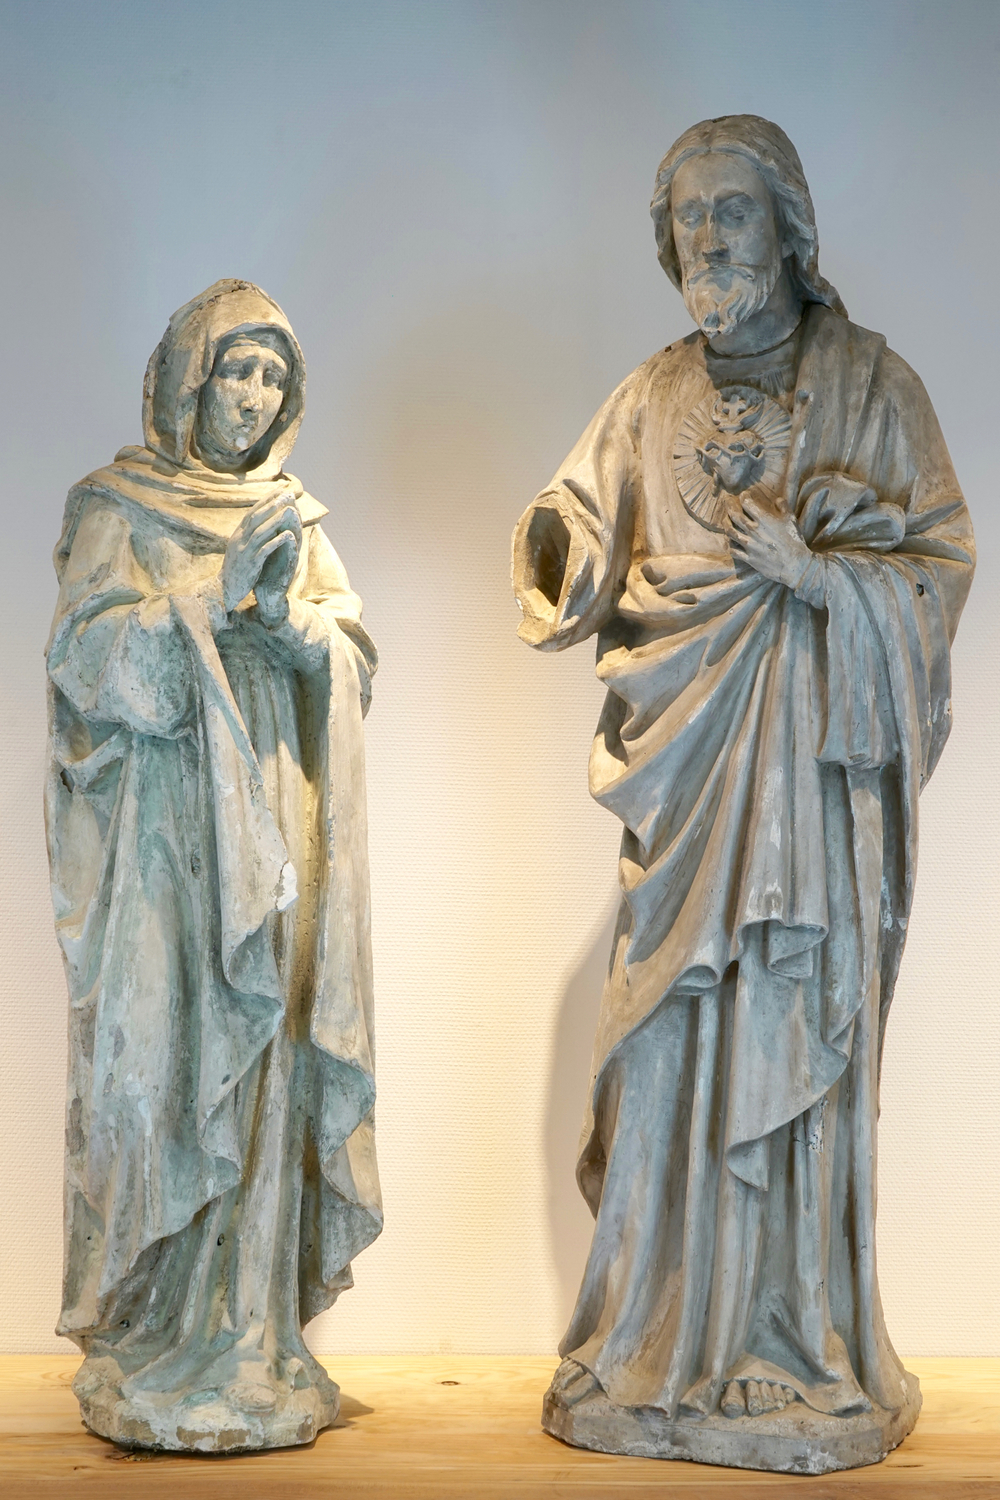 Two 120 cm plaster casts of religious figures, 19/20th C., Bruges